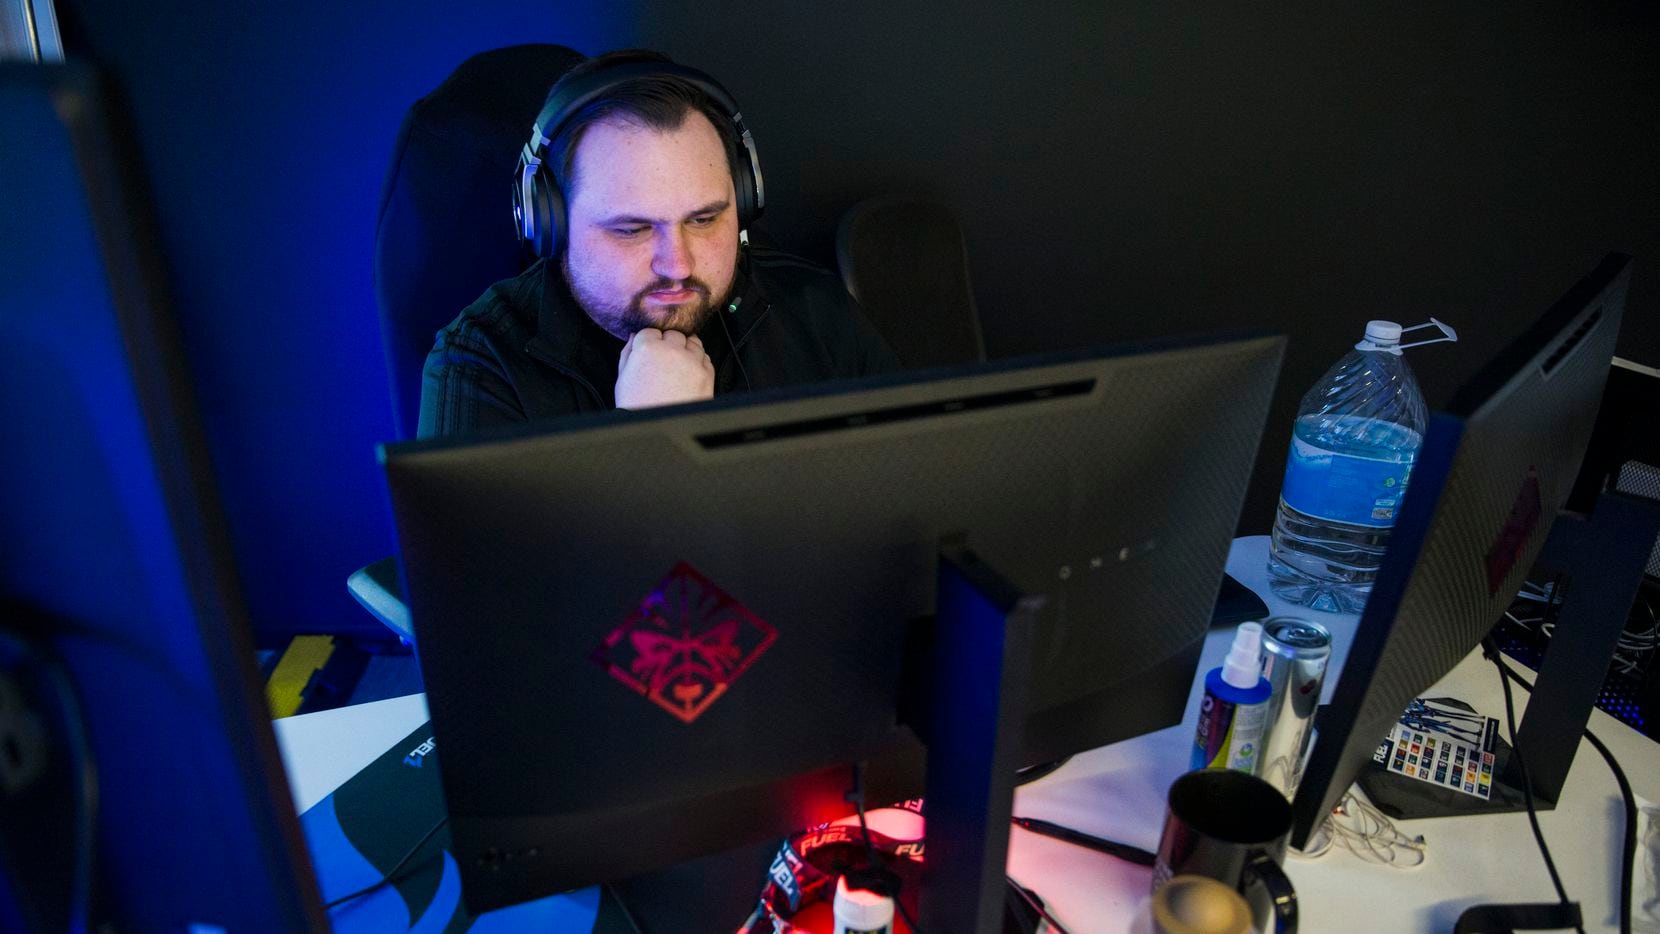 Dallas Fuel Head Coach Aaron "Aero" Atkins practices on Wednesday, January 29, 2020 at Envy...